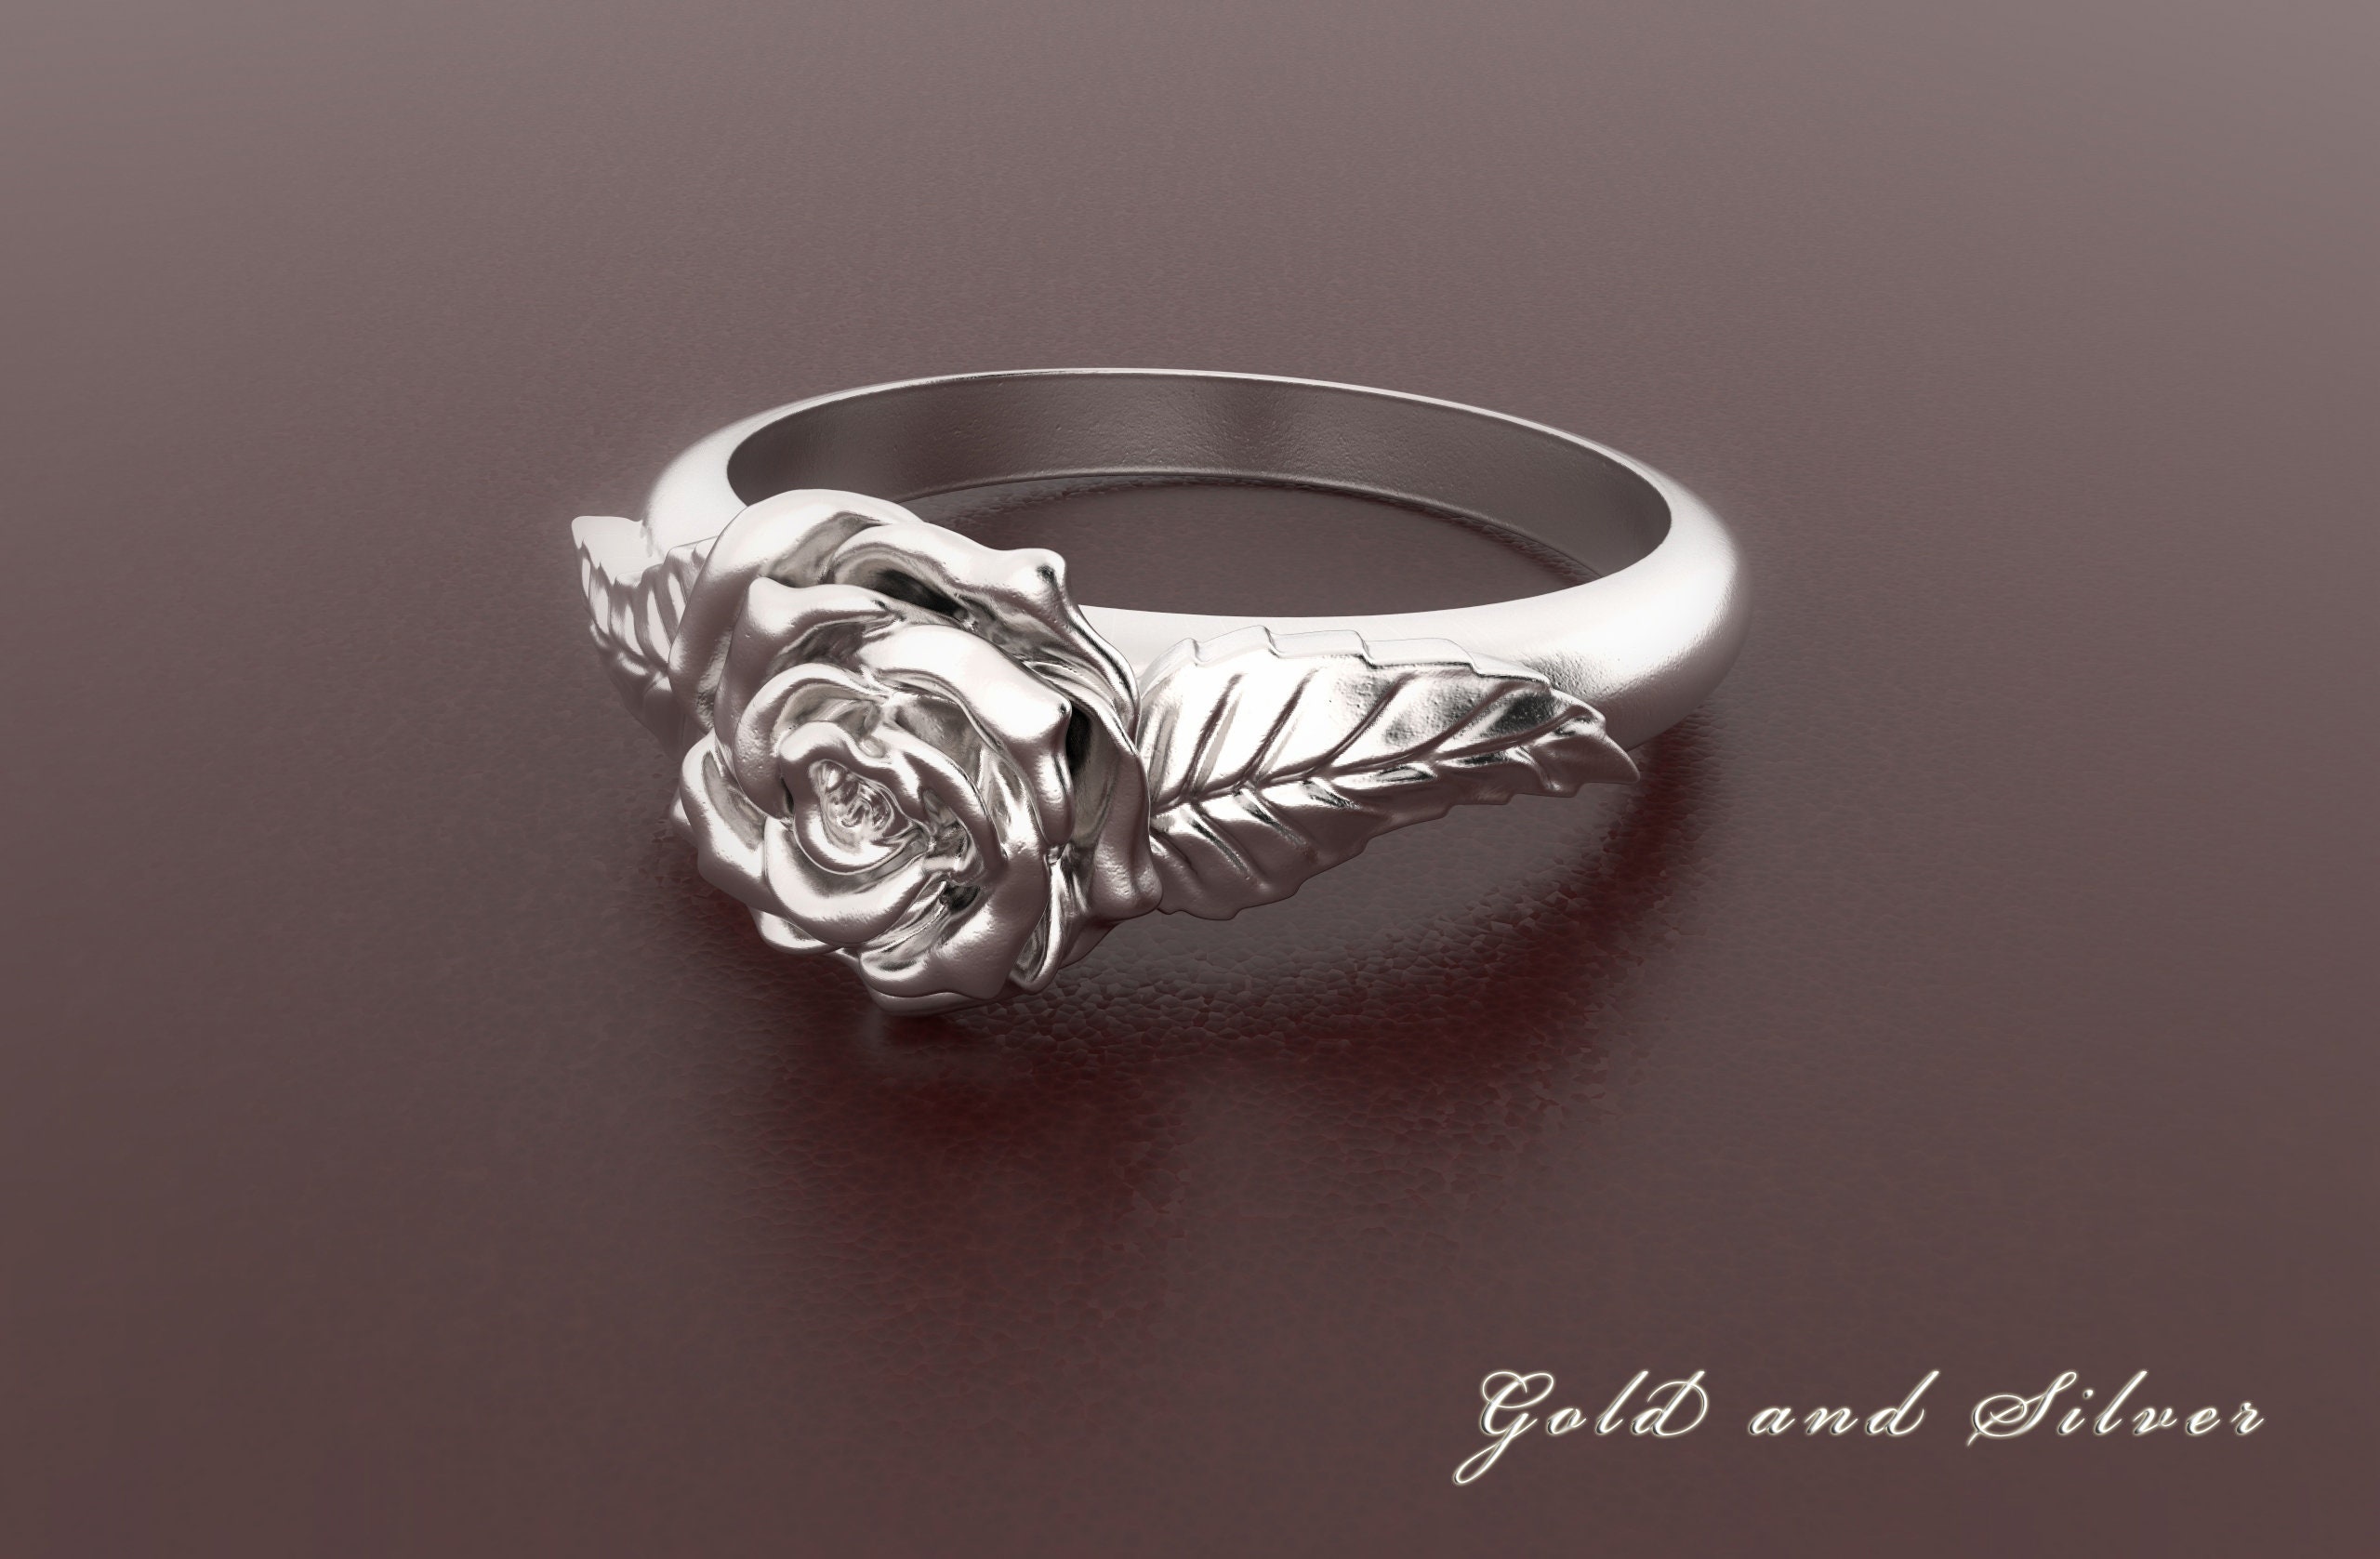 Buy Rose Ring, Sterling Silver, Rose Jewelry Online in India - Etsy